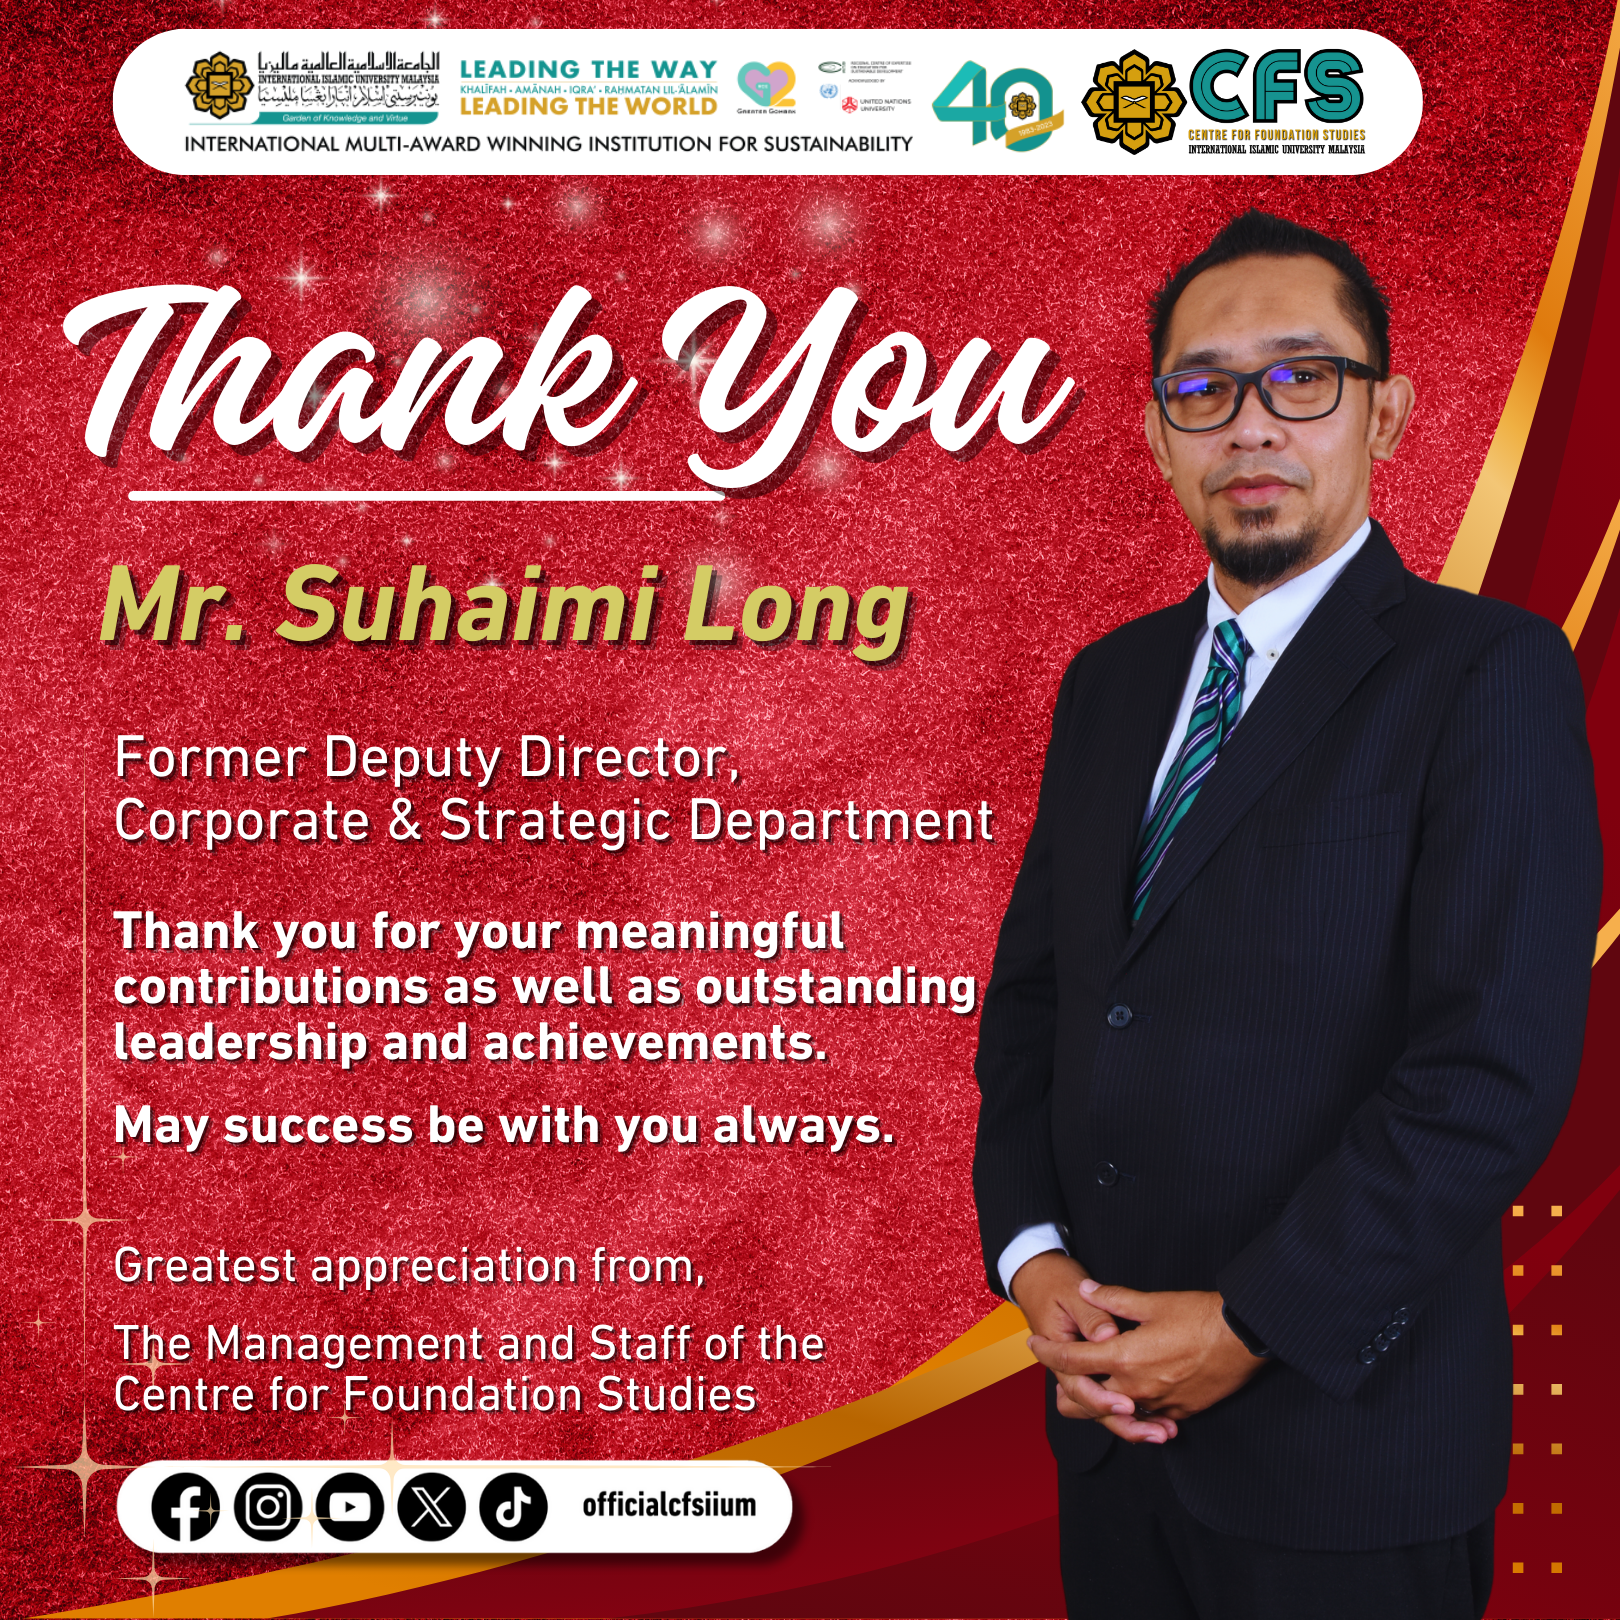 Thank you to Mr. Suhaimi Long